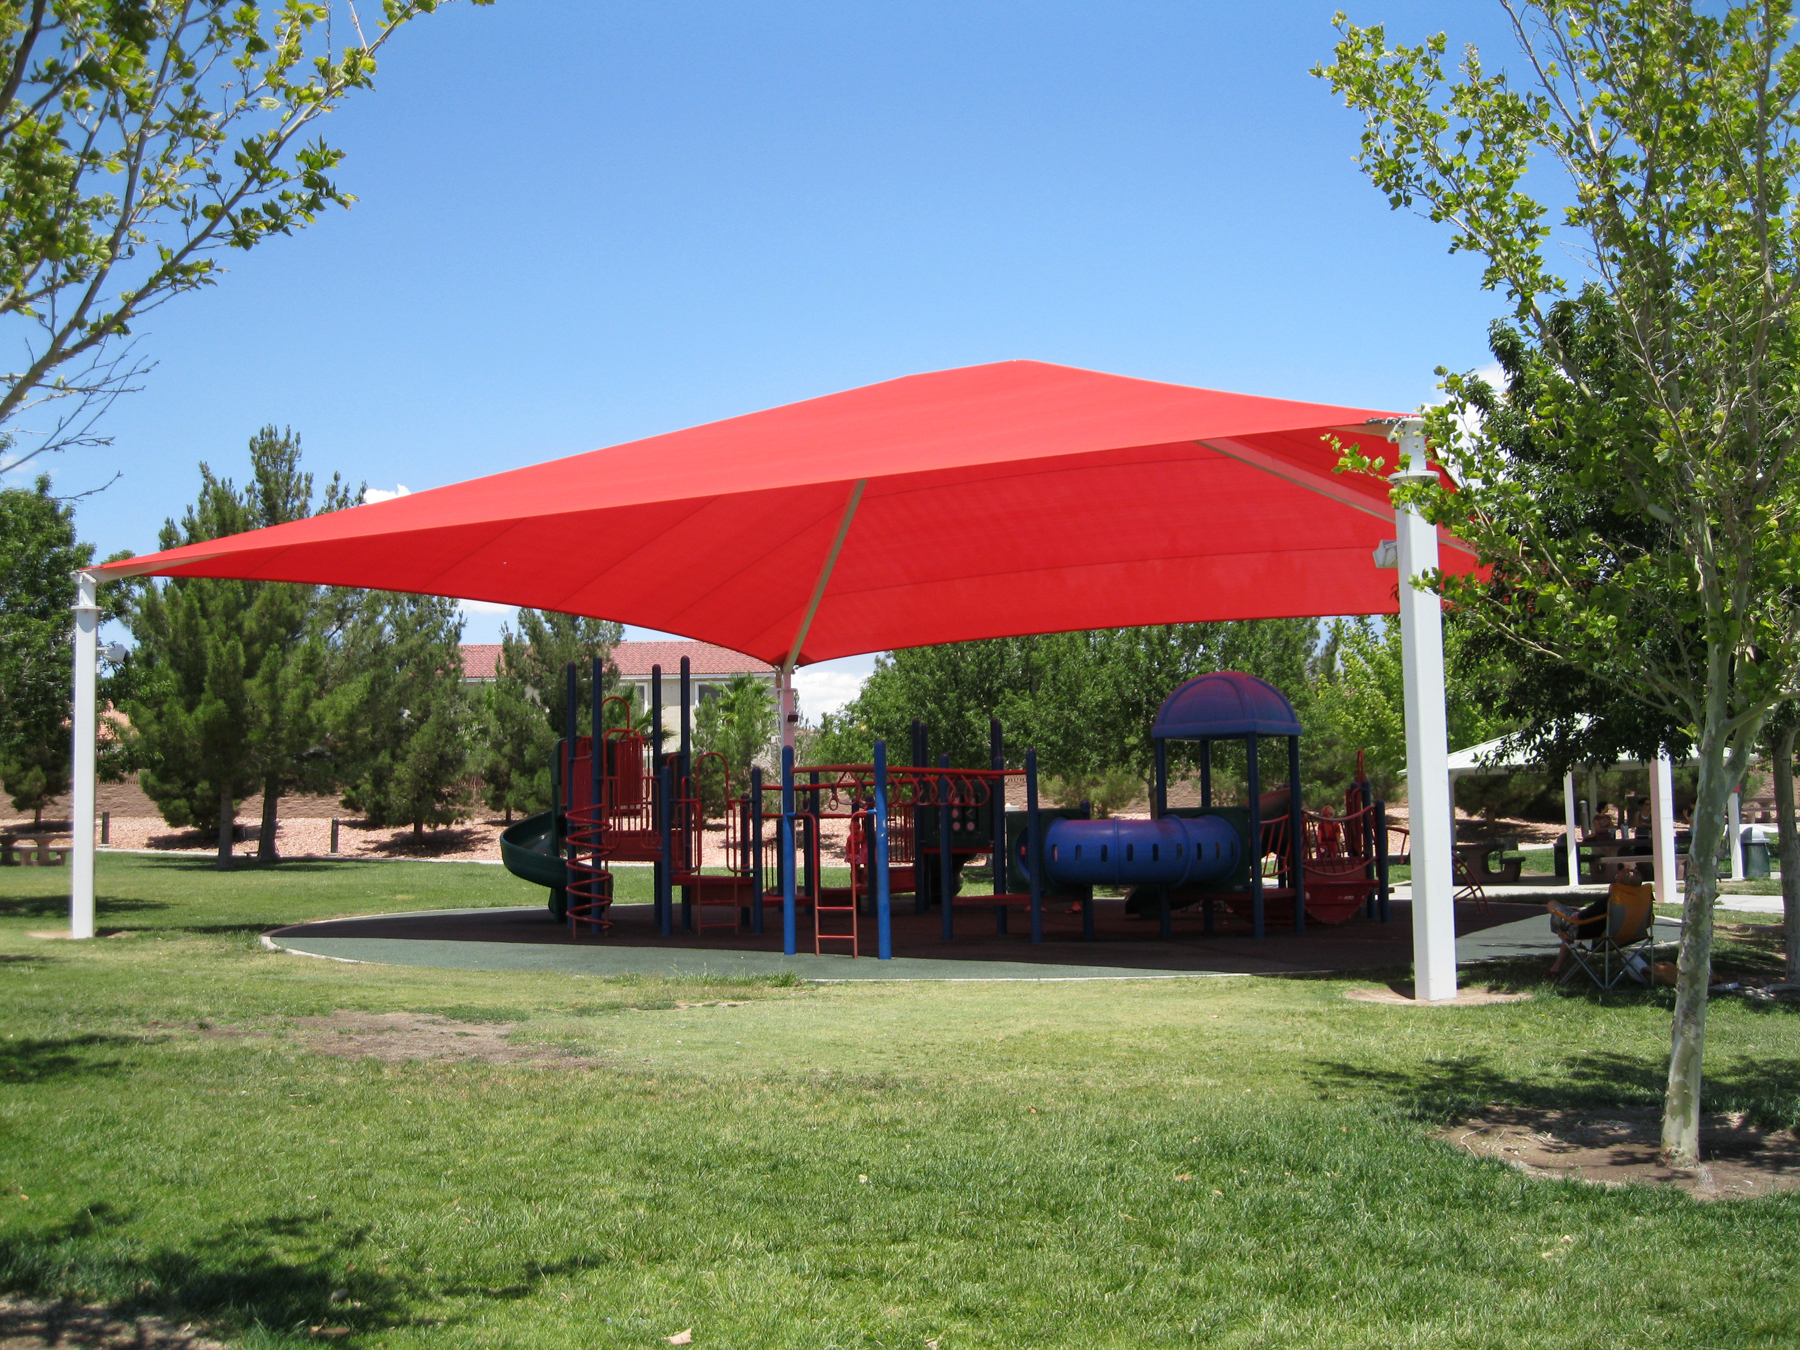 shade covering outdoor playground